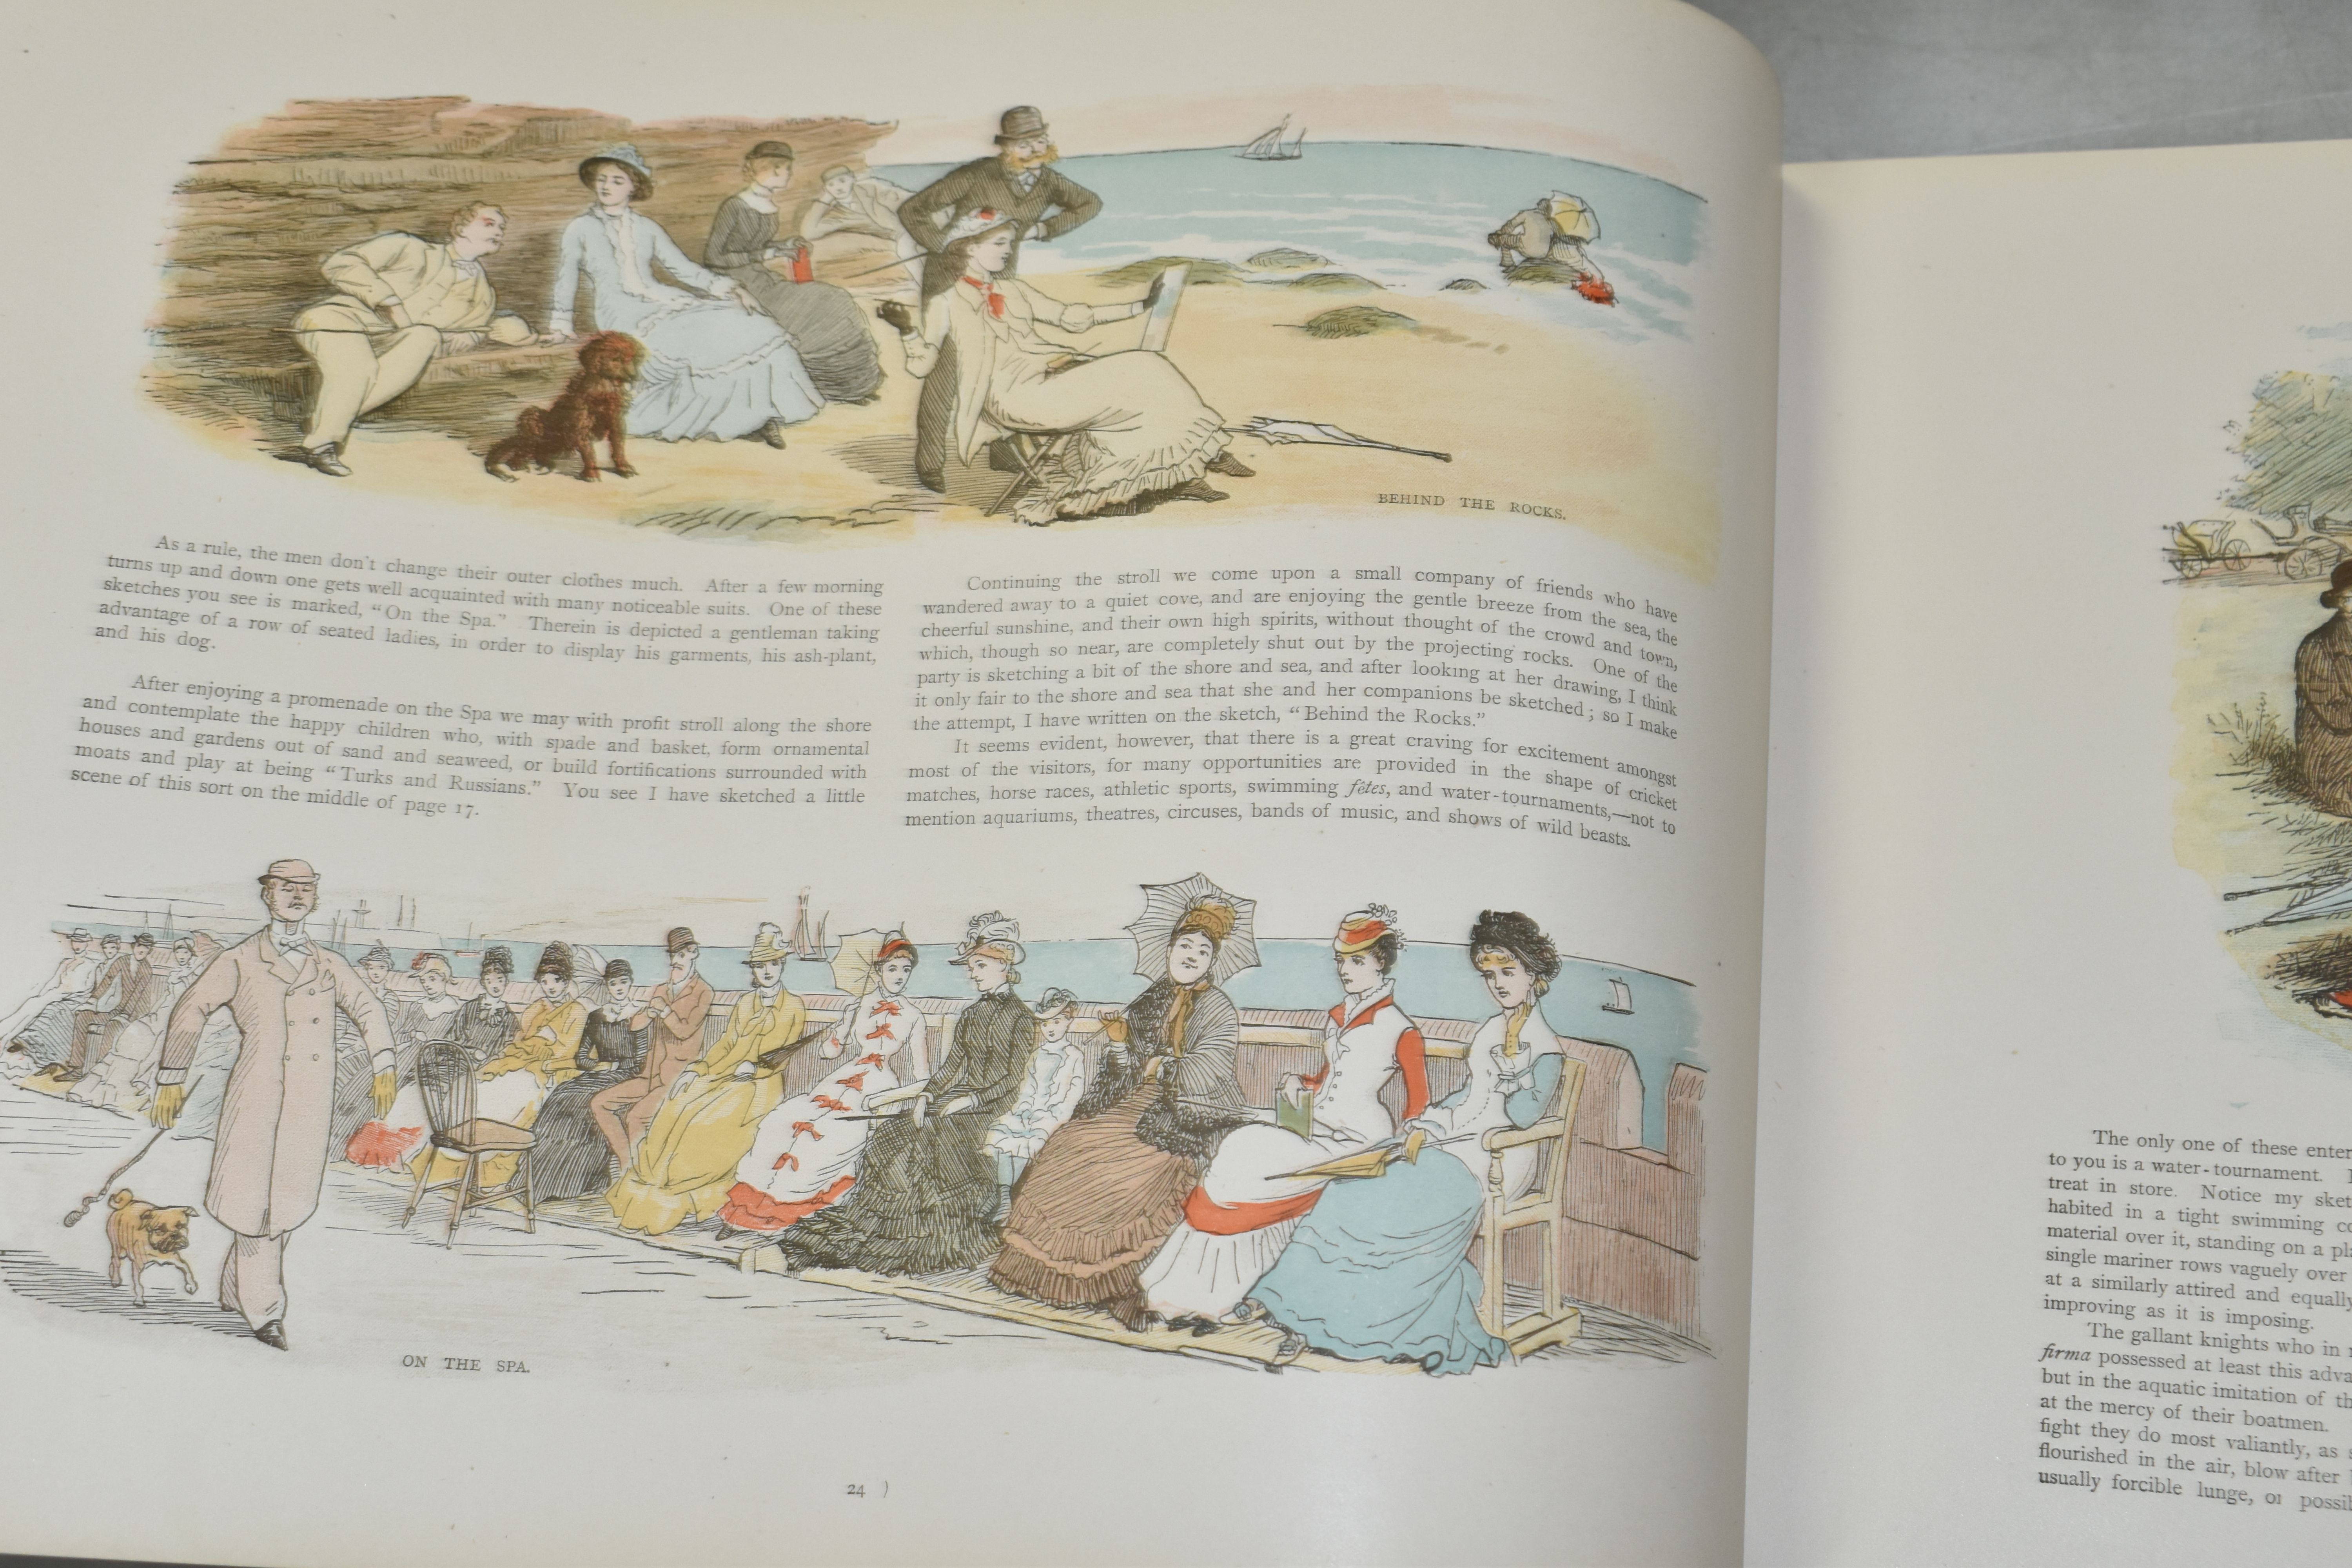 RANDOLPH CALDECOTT'S 'GRAPHIC' PICTURES, Complete Edition, published by George Routledge & Sons (1) - Image 8 of 16